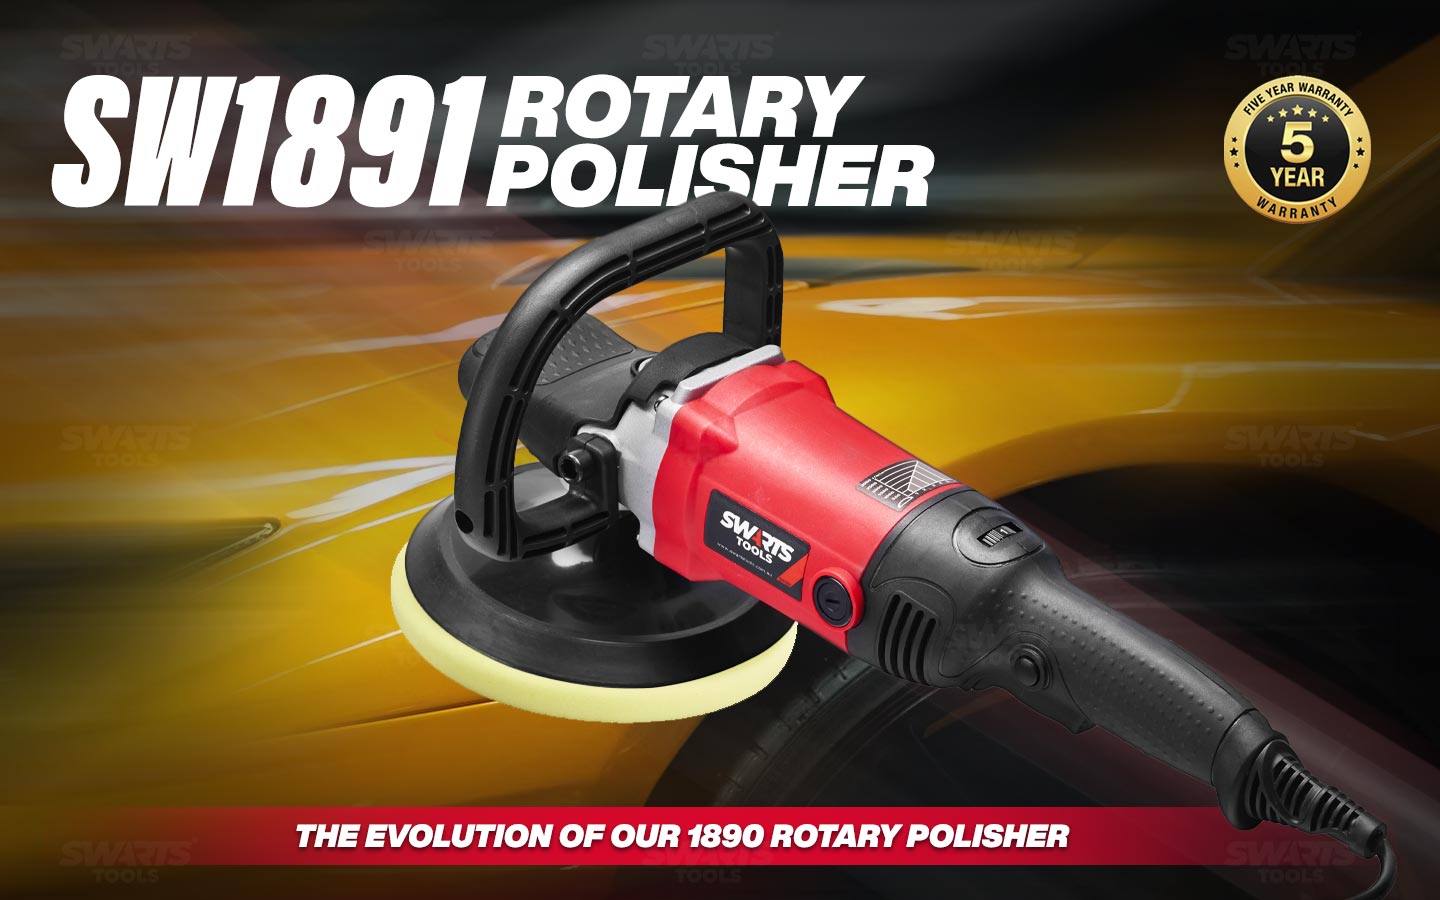 SW1891 Rptary Polisher, The evolution of our 1890 rotary polisher